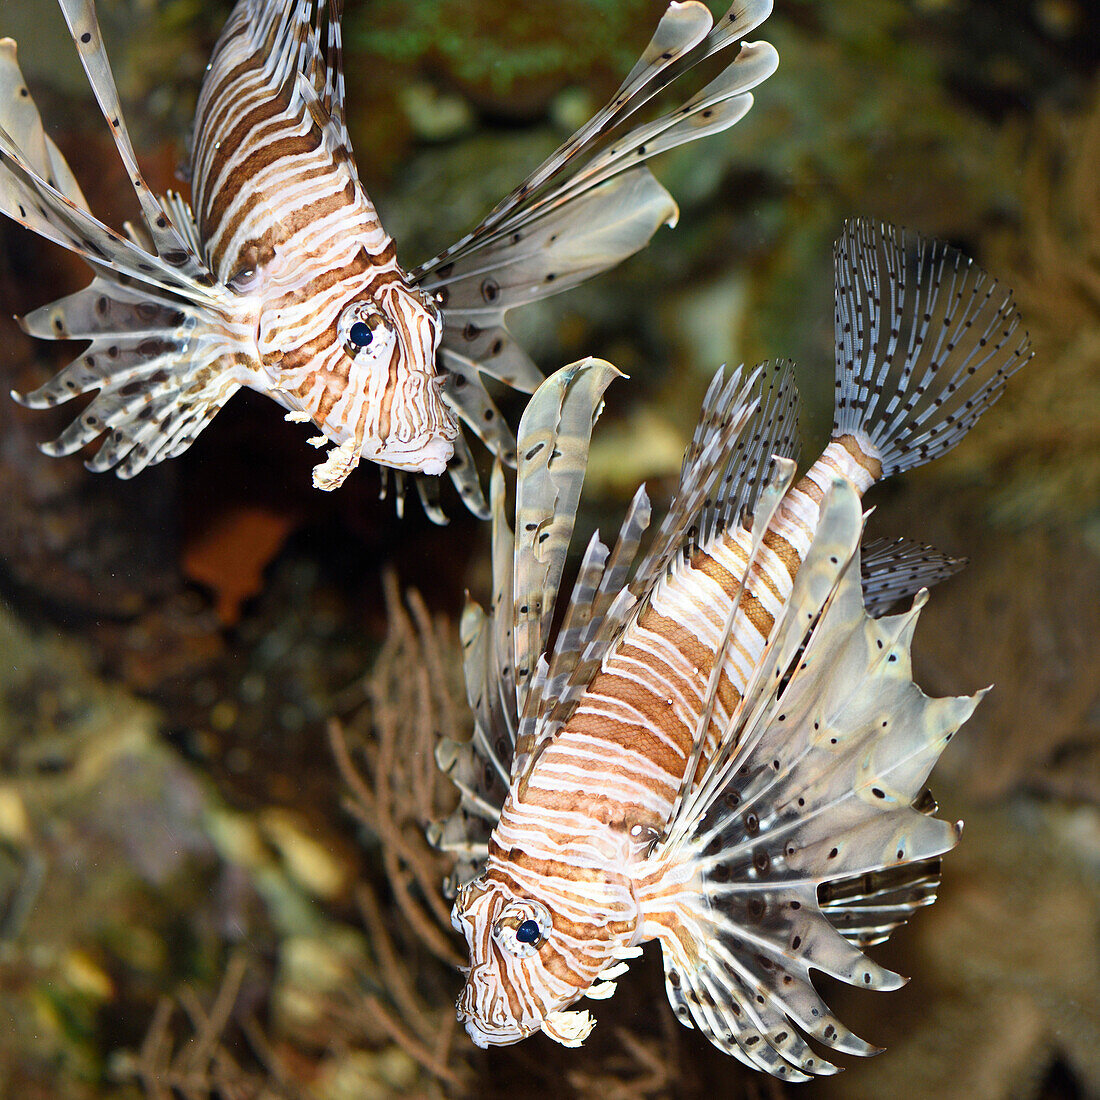 Close-up of two red lionfish (Pterois volitans) in an aquarium, Germany